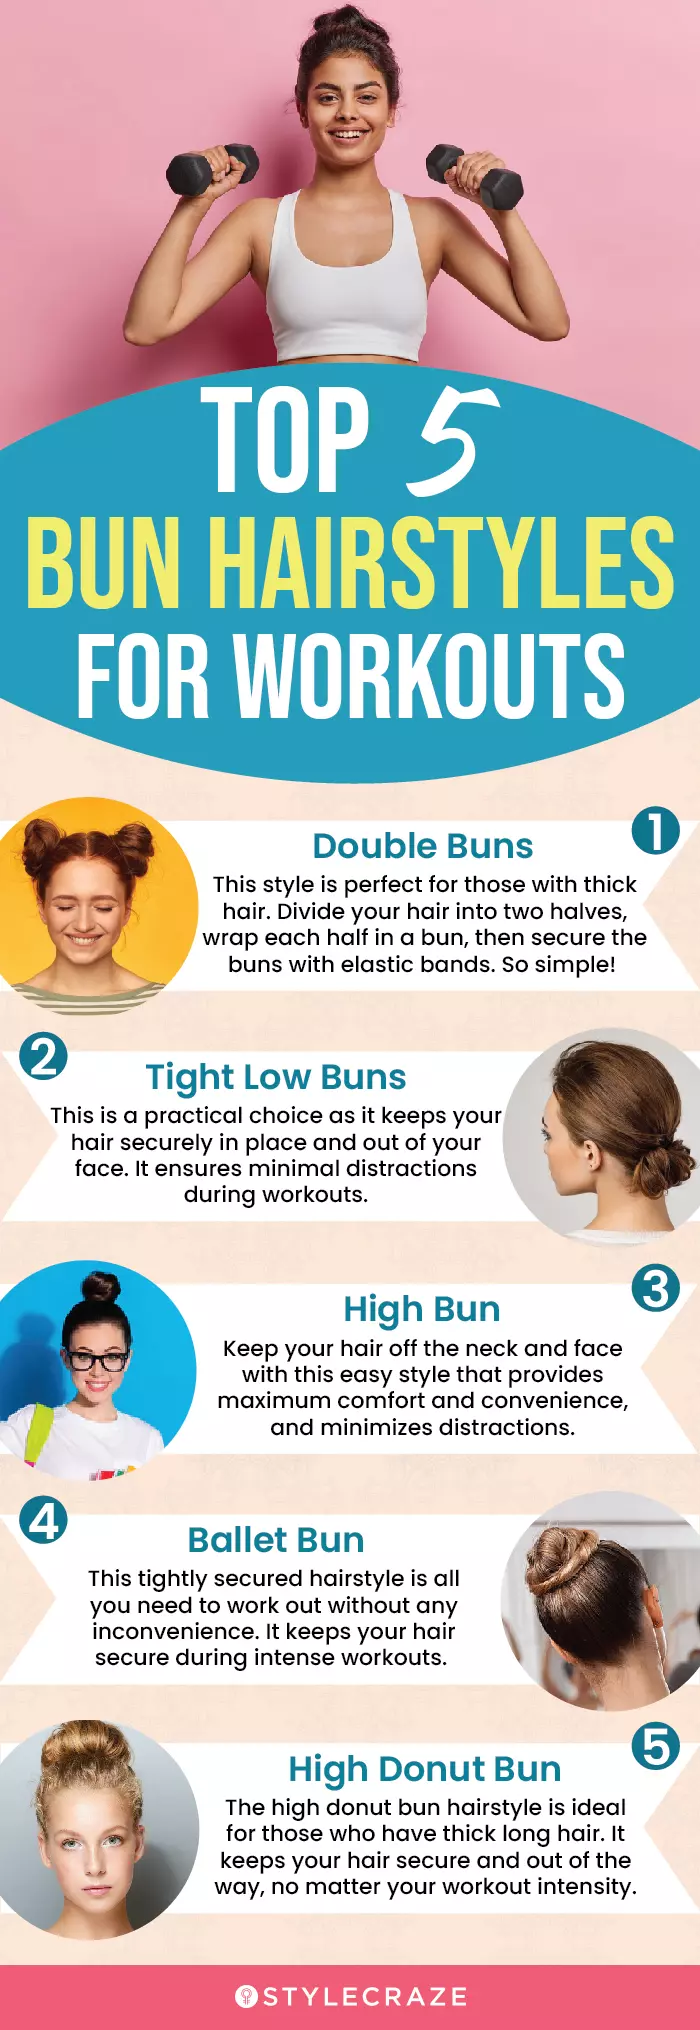 Best Protective Styles for Working Out (and the Worst!) - Ijeoma Kola